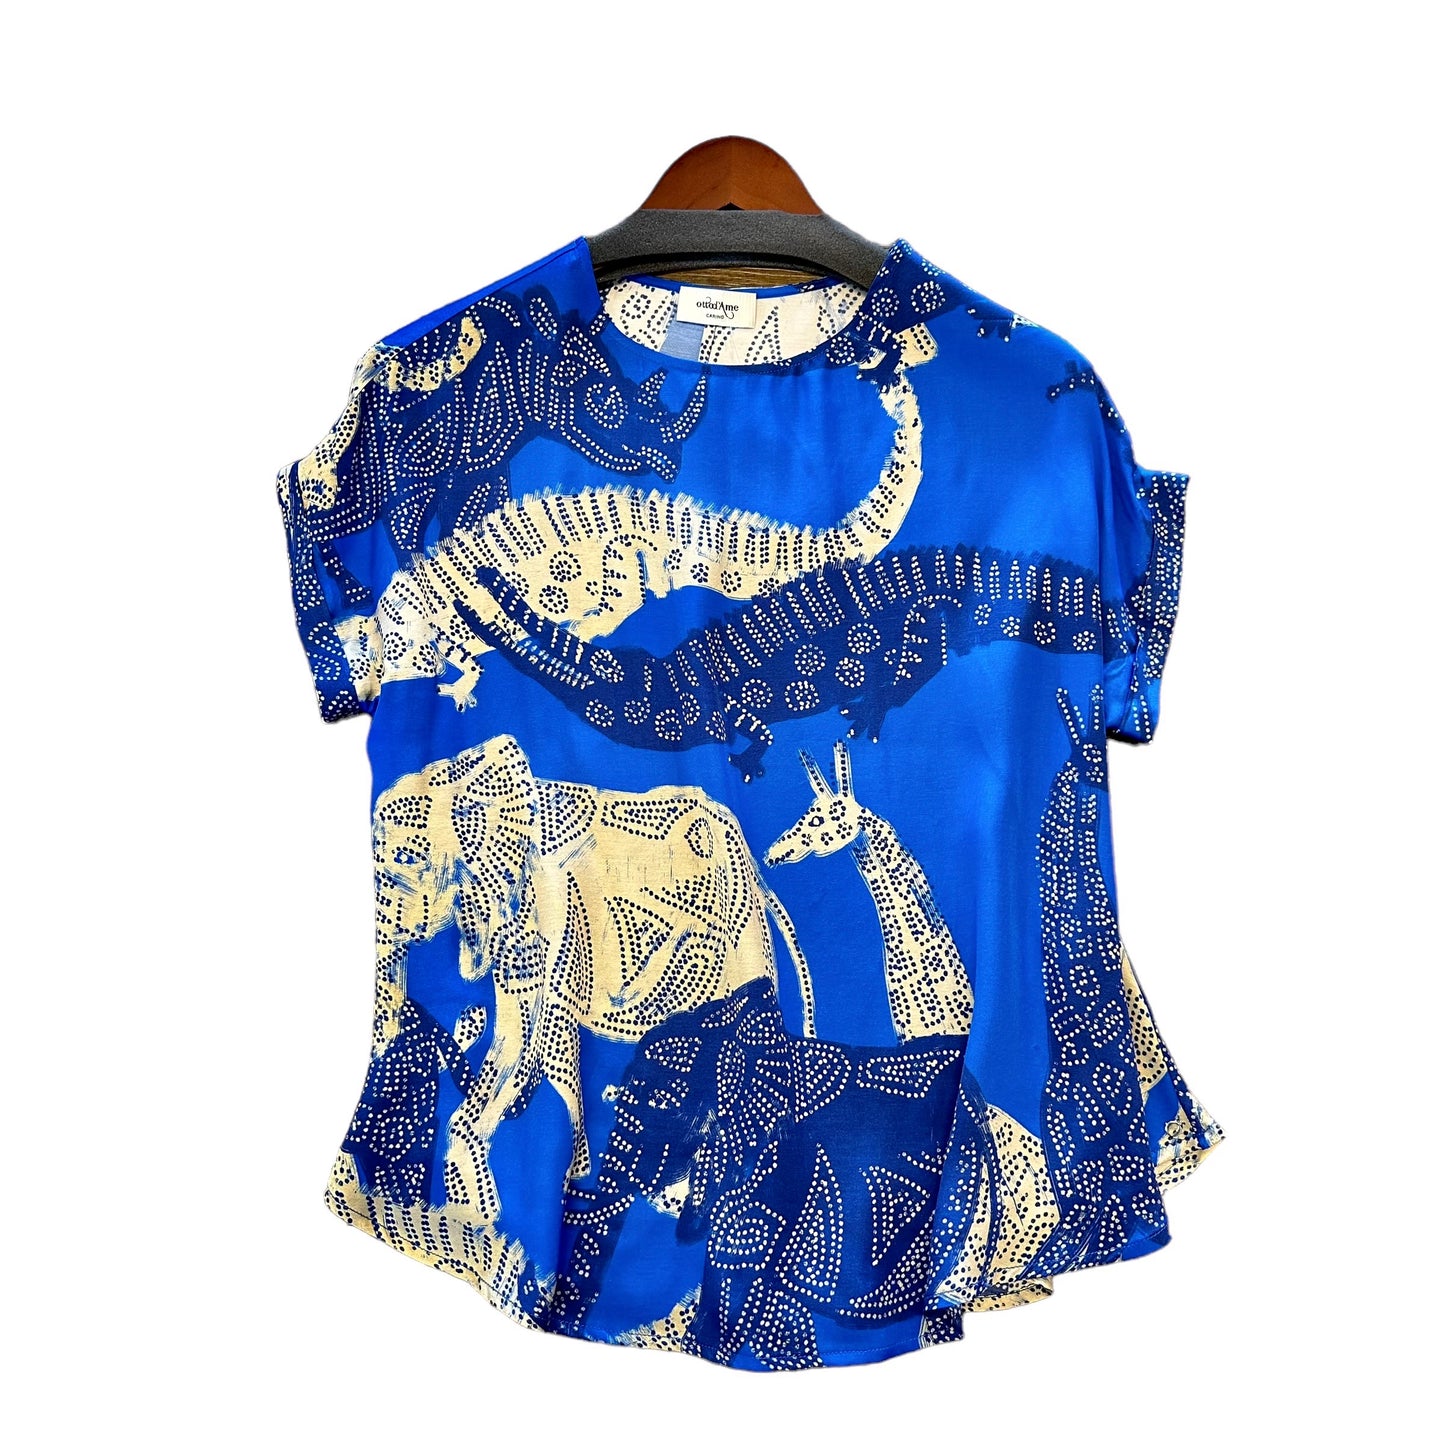 Printed Short Sleeve Blouse in blue by Ottod'ame